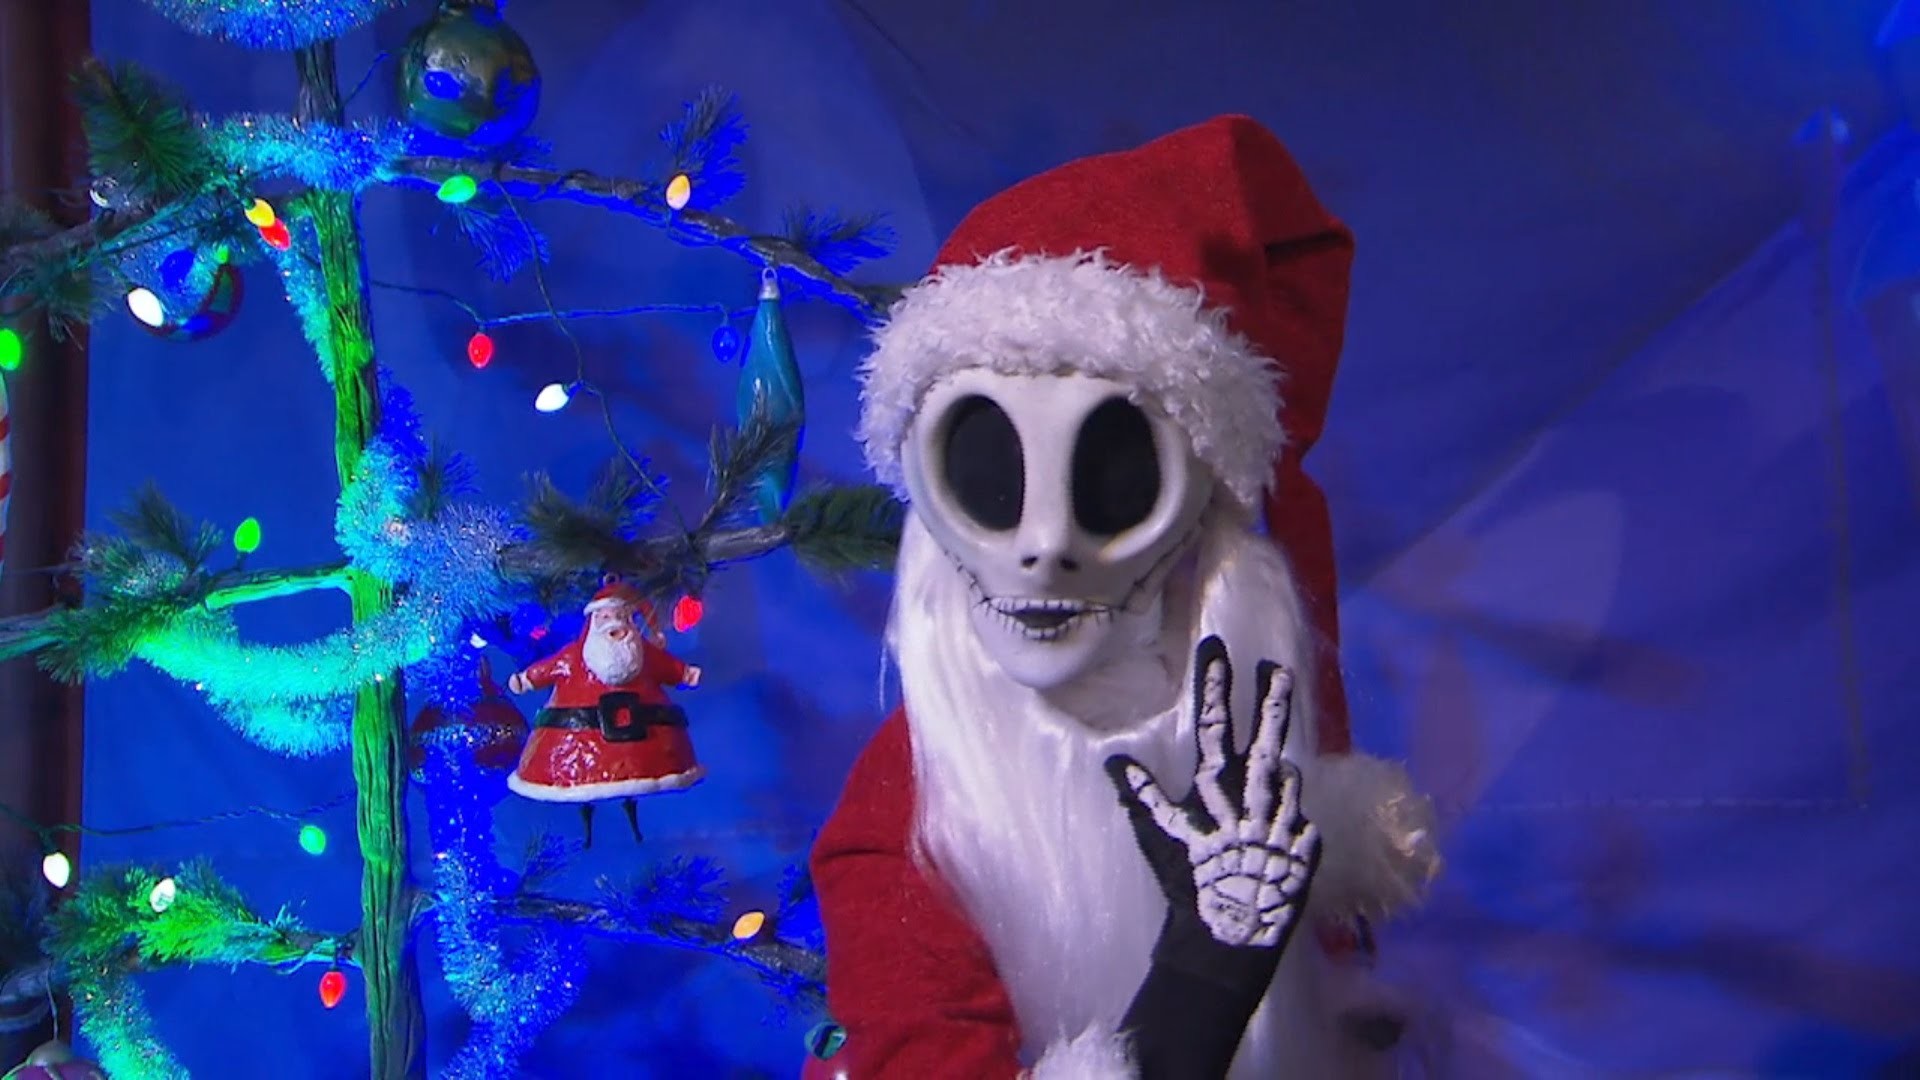 1920x1080 Meet Jack Skellington as Sandy Claws during Very Merry Christmas Party -  YouTube